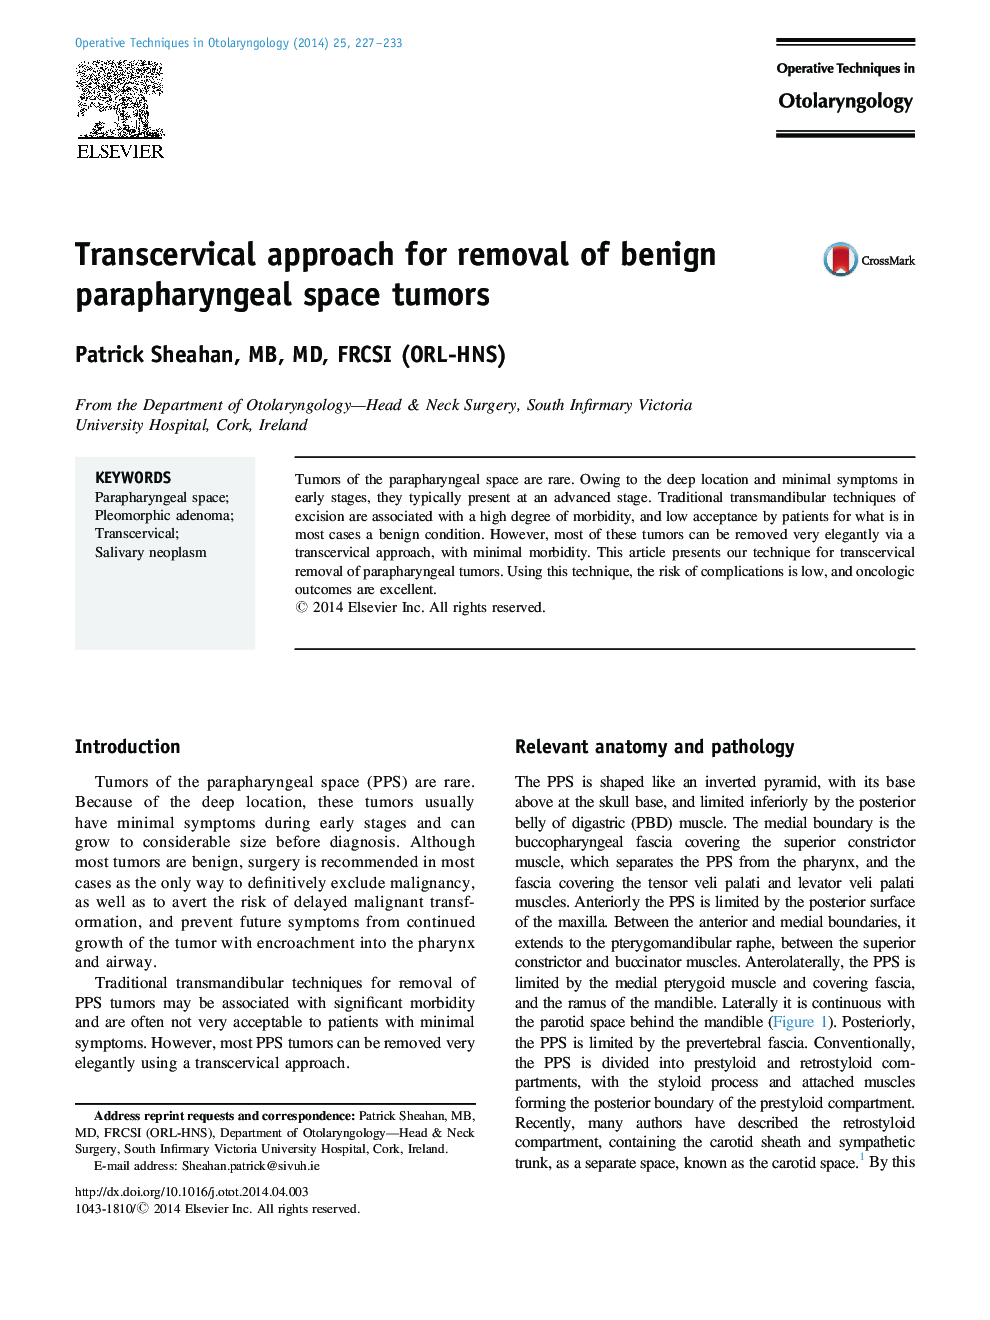 Transcervical approach for removal of benign parapharyngeal space tumors